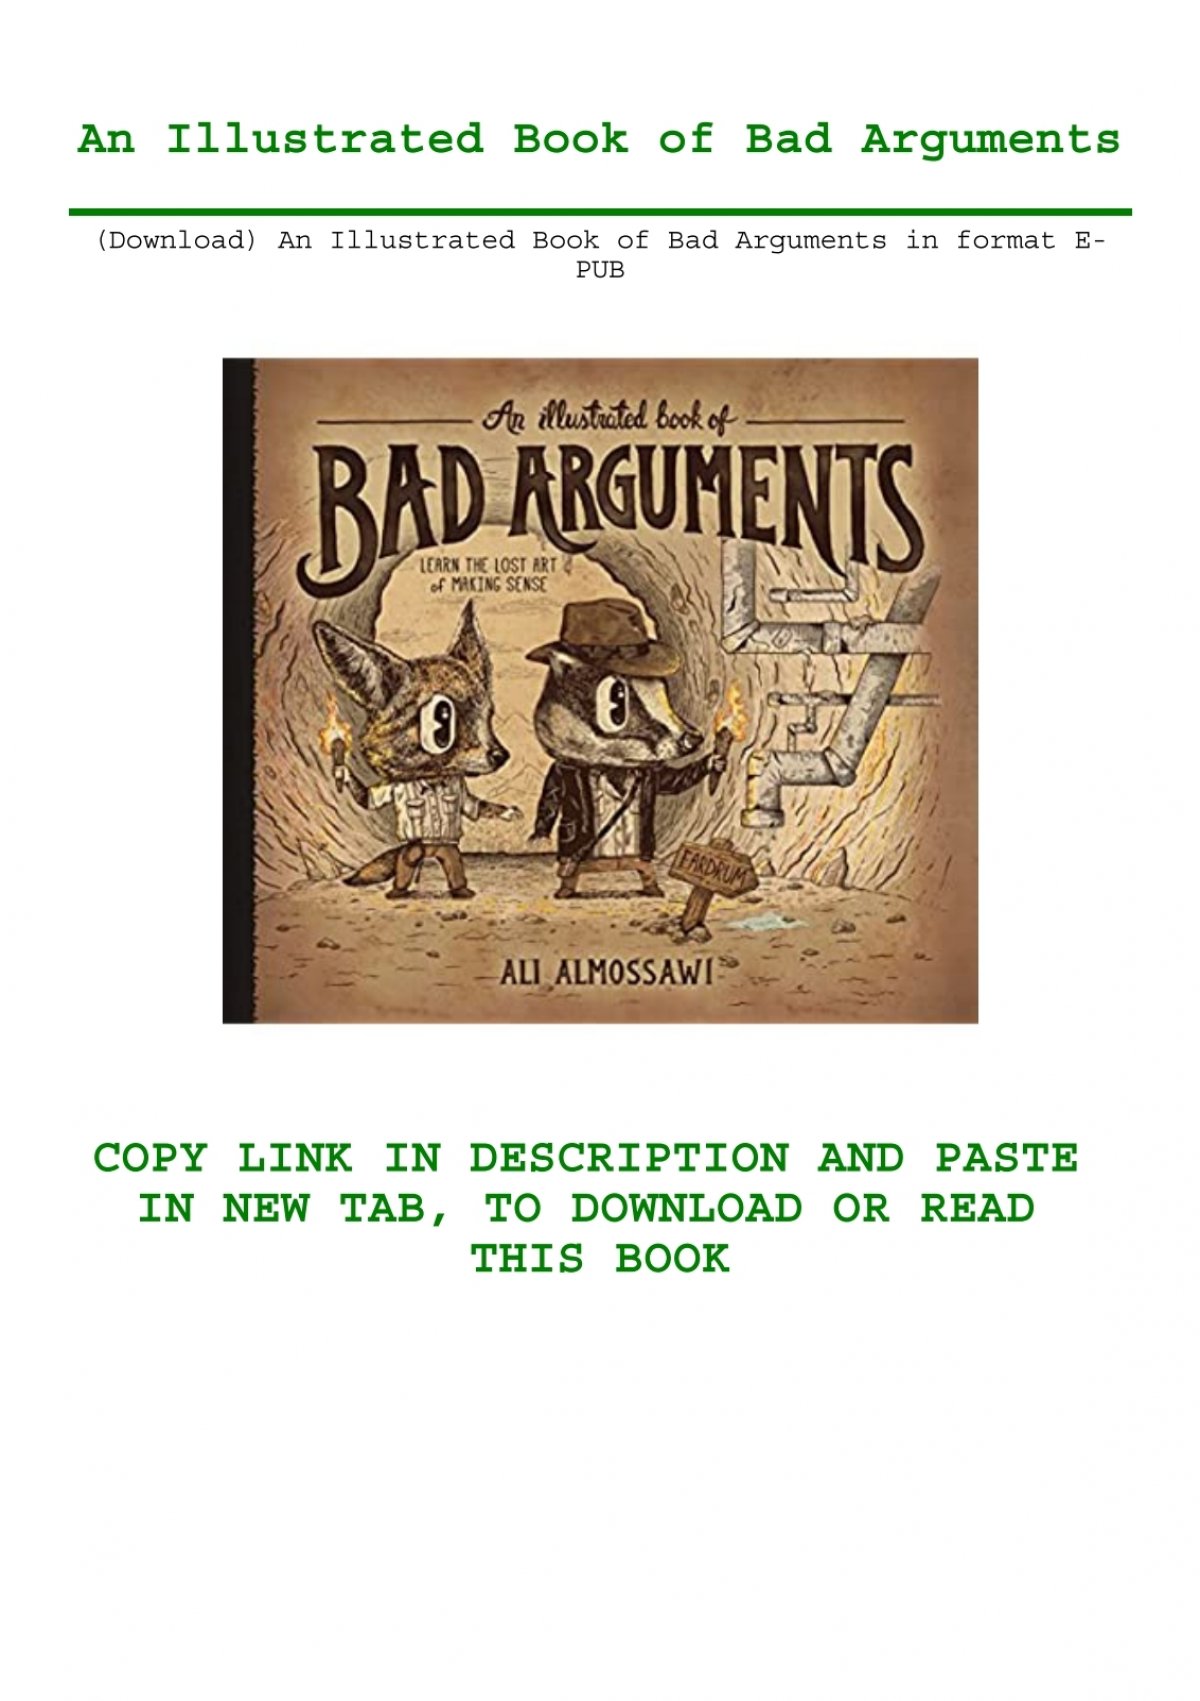 an illustrated book of bad arguments free download